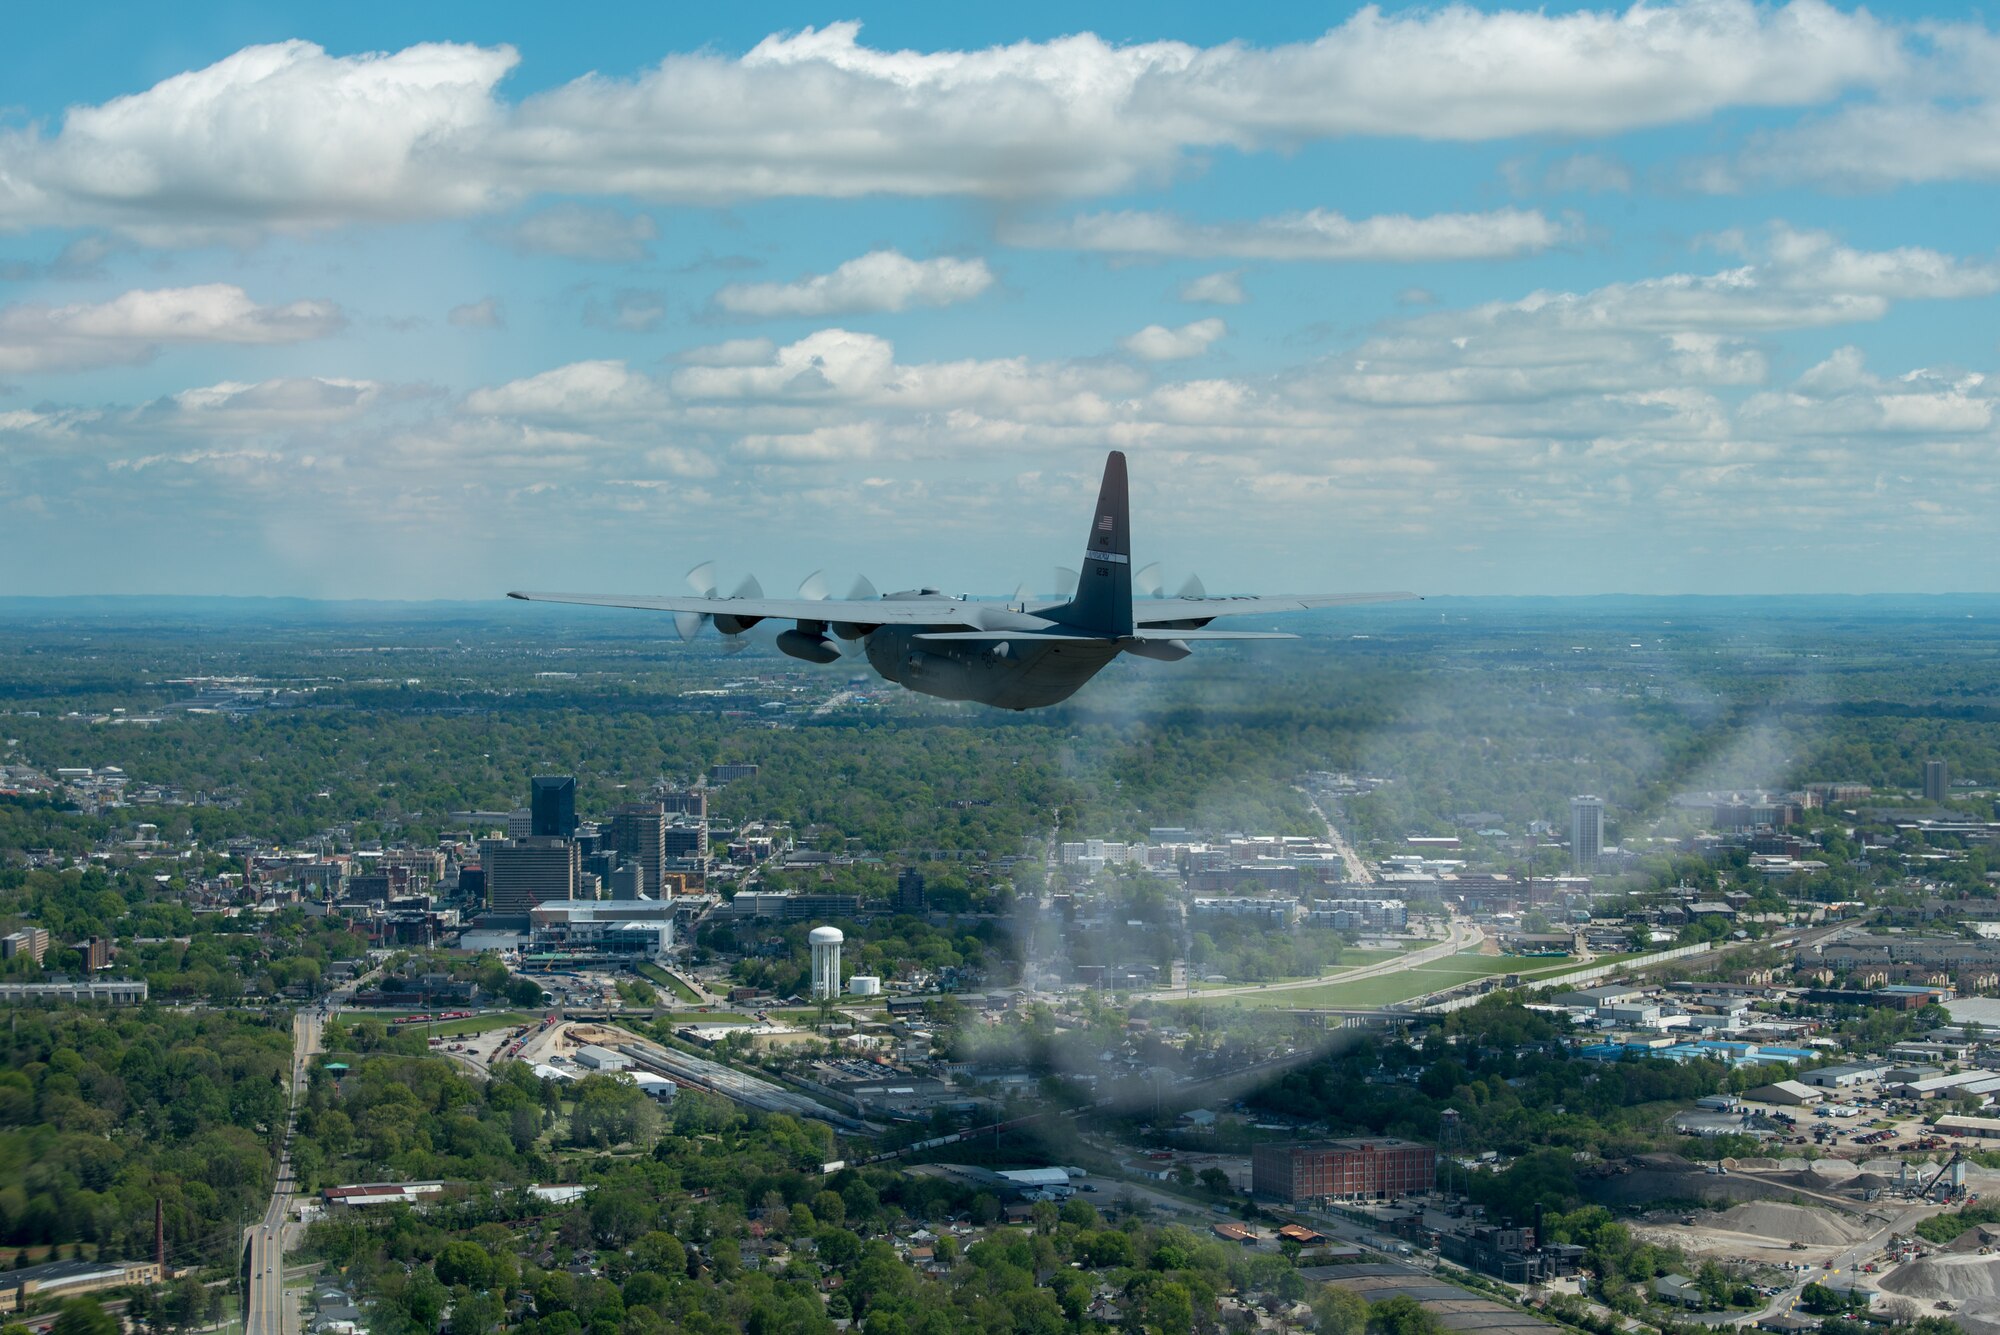 A Kentucky Air National Guard C-130 Hercules flies over the commonwealth of Kentucky as part of Operation American Resolve on Friday, May 1, 2020.  The 123rd Airlift Wing sent two C-130s for the aerial demonstration that is a nationwide salute to all those supporting COVID-19 response efforts. The flyover is intended to lift morale during a time of severe health and economic impacts that have resulted from COVID-19. (U.S. Air National Guard photo by Phil Speck)